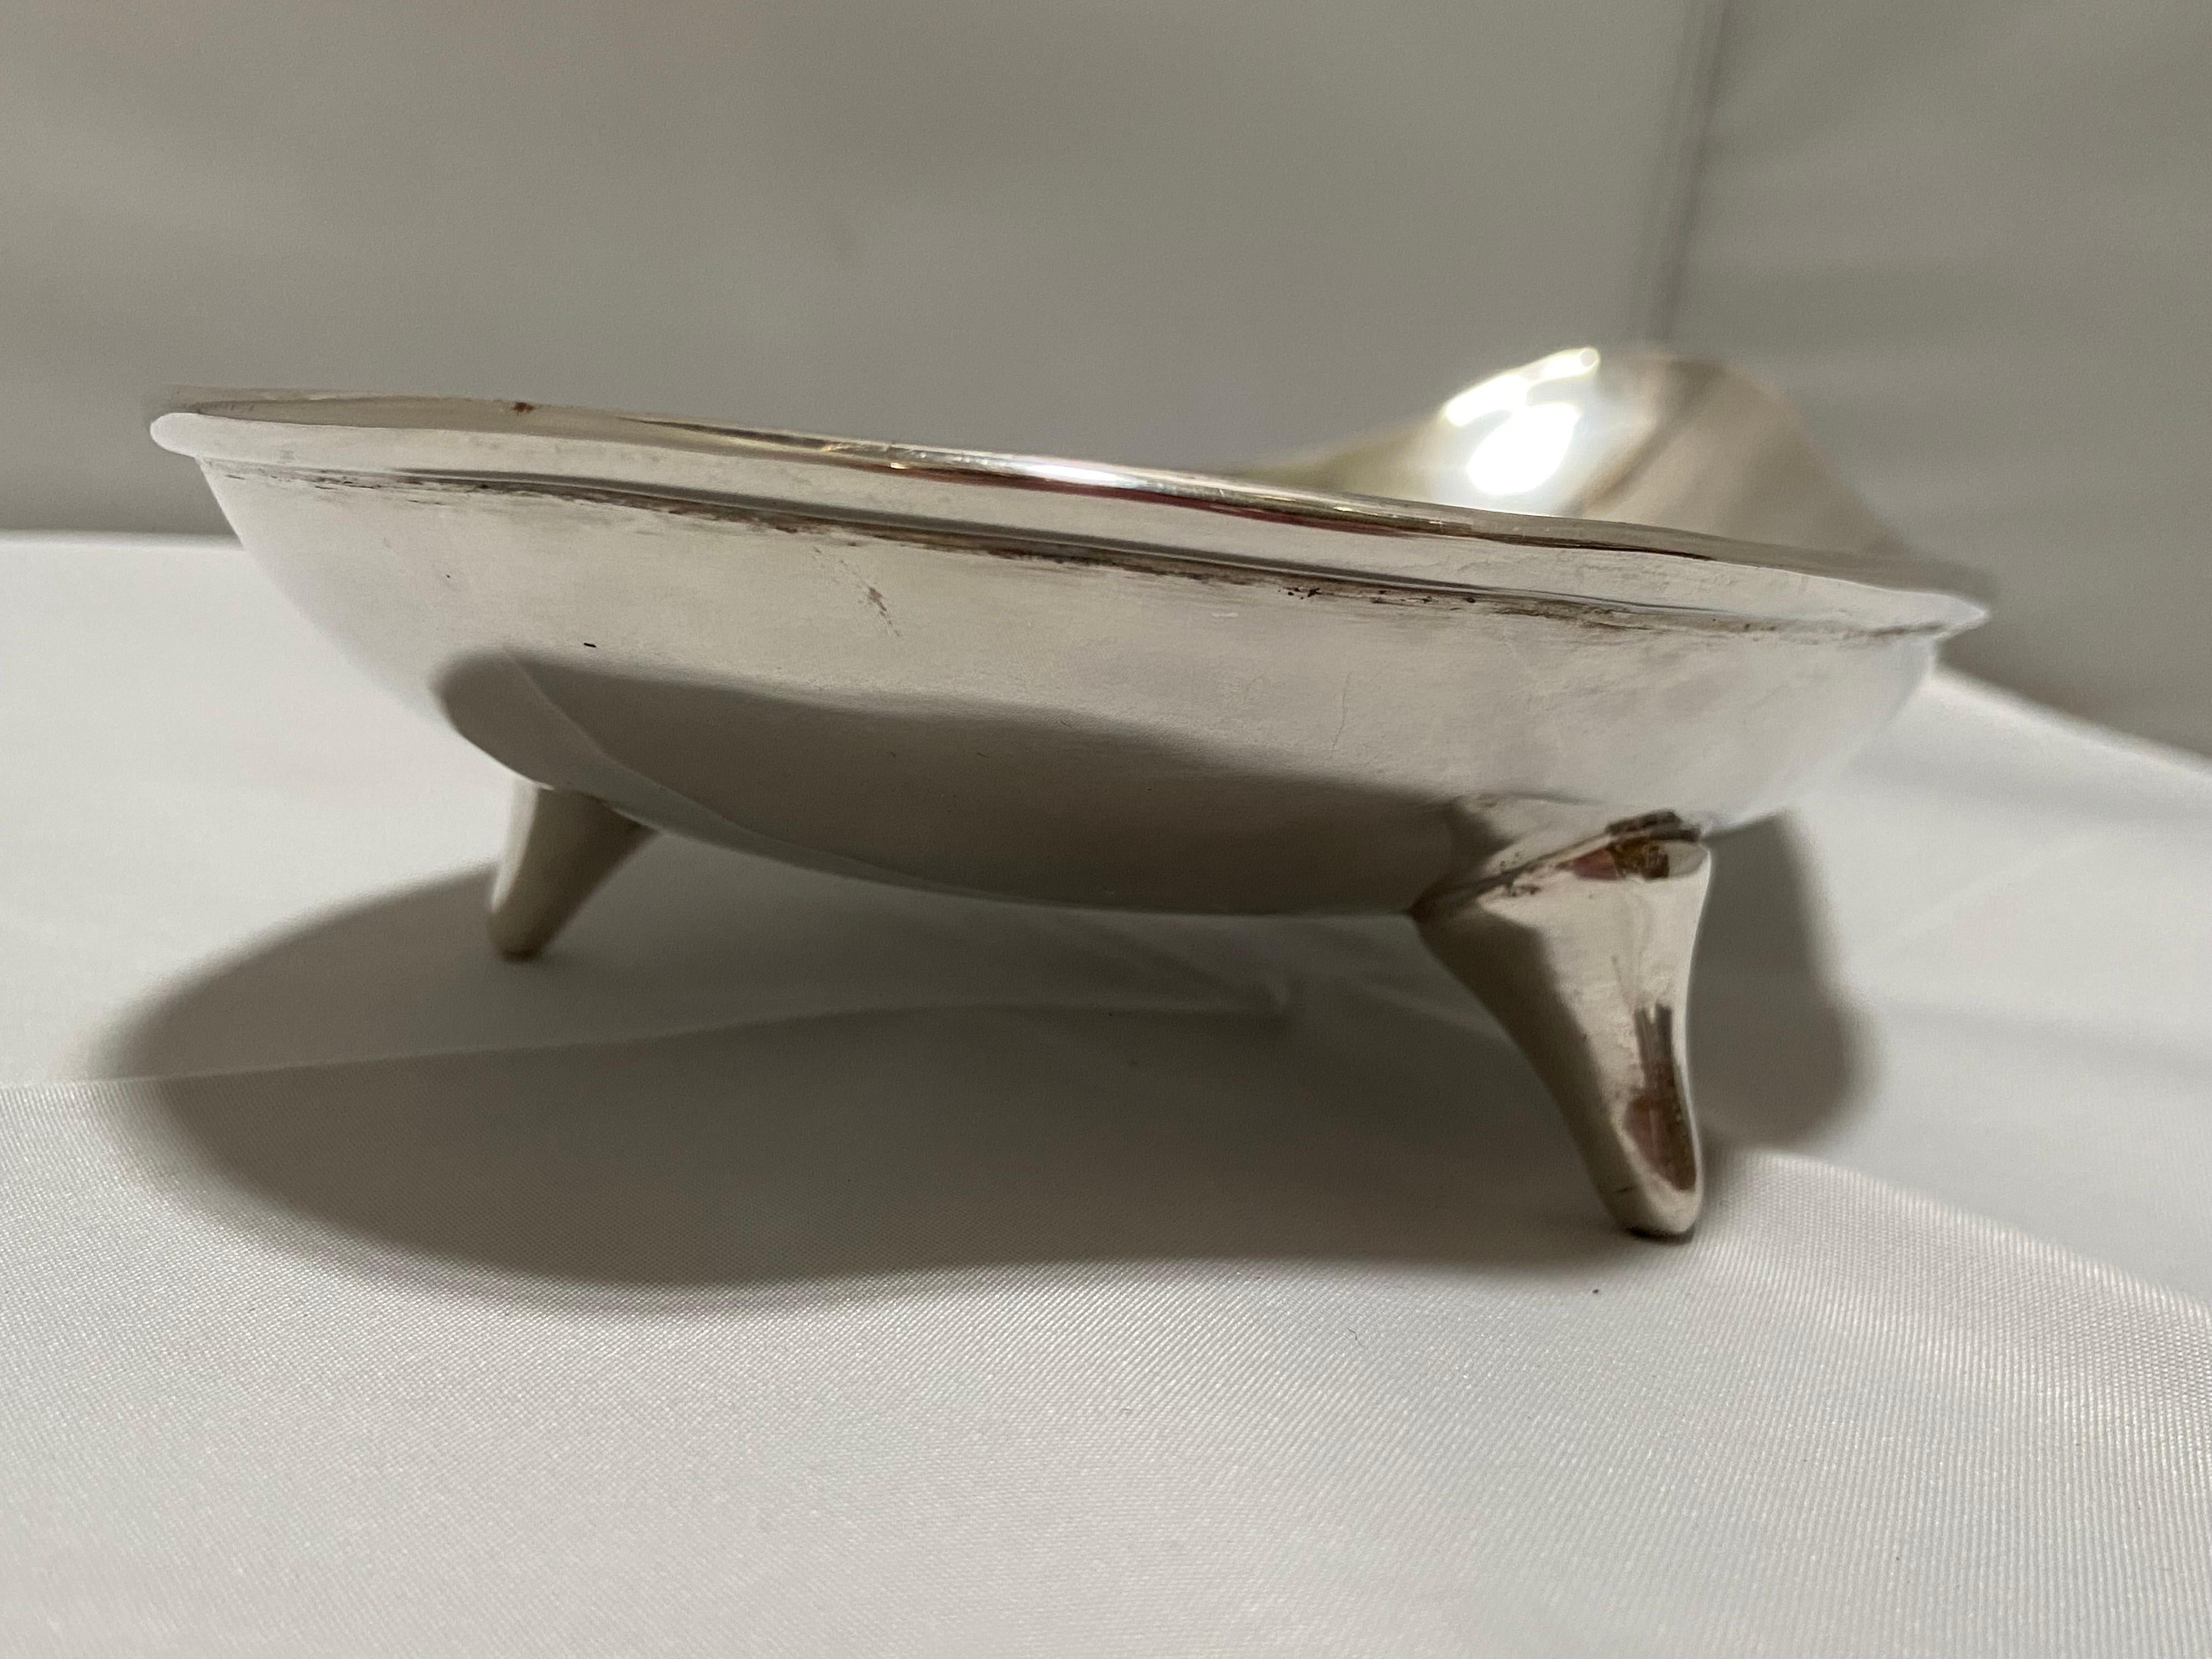 Vintage Mexican Mid-Century Modern Sterling Silver Footed Bowl or Dish by Zurita For Sale 5